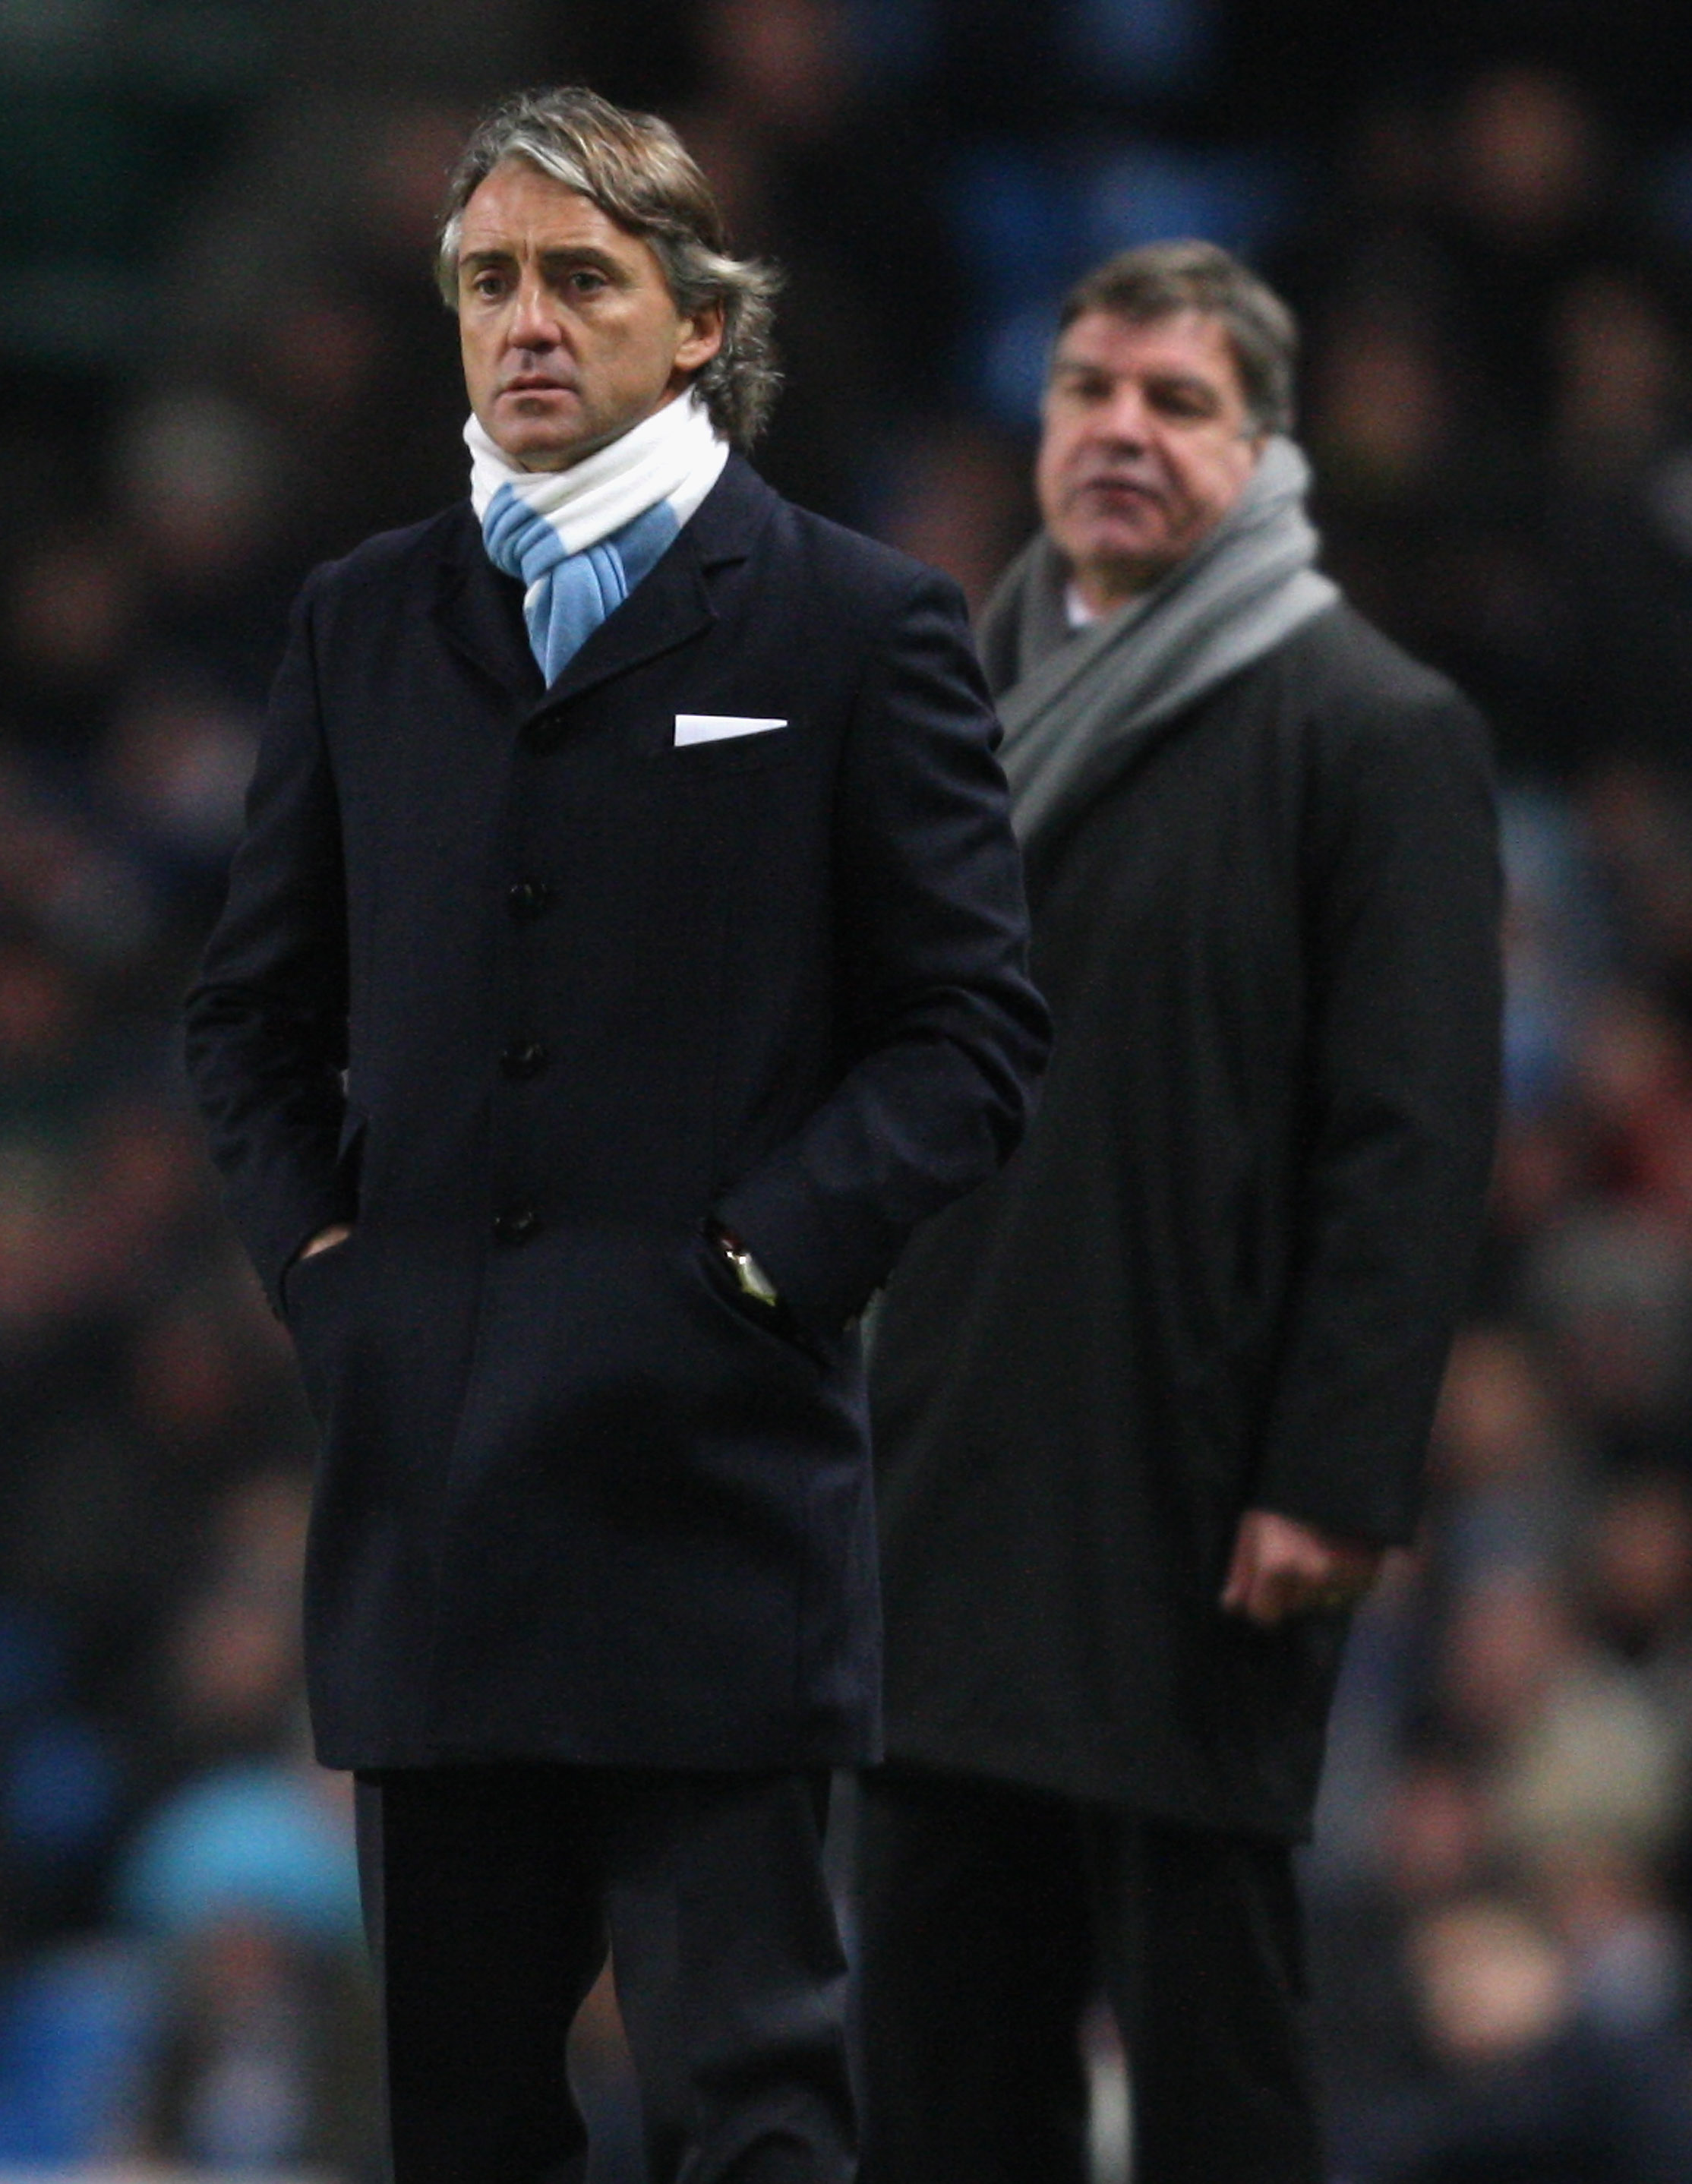 MANCHESTER, ENGLAND - JANUARY 11:  Manchester City Manager Roberto Mancini watches the action during the Barclays Premier League match between Manchester City and Blackburn Rovers at the City of Manchester Stadium on January 11, 2010 in Manchester, Englan